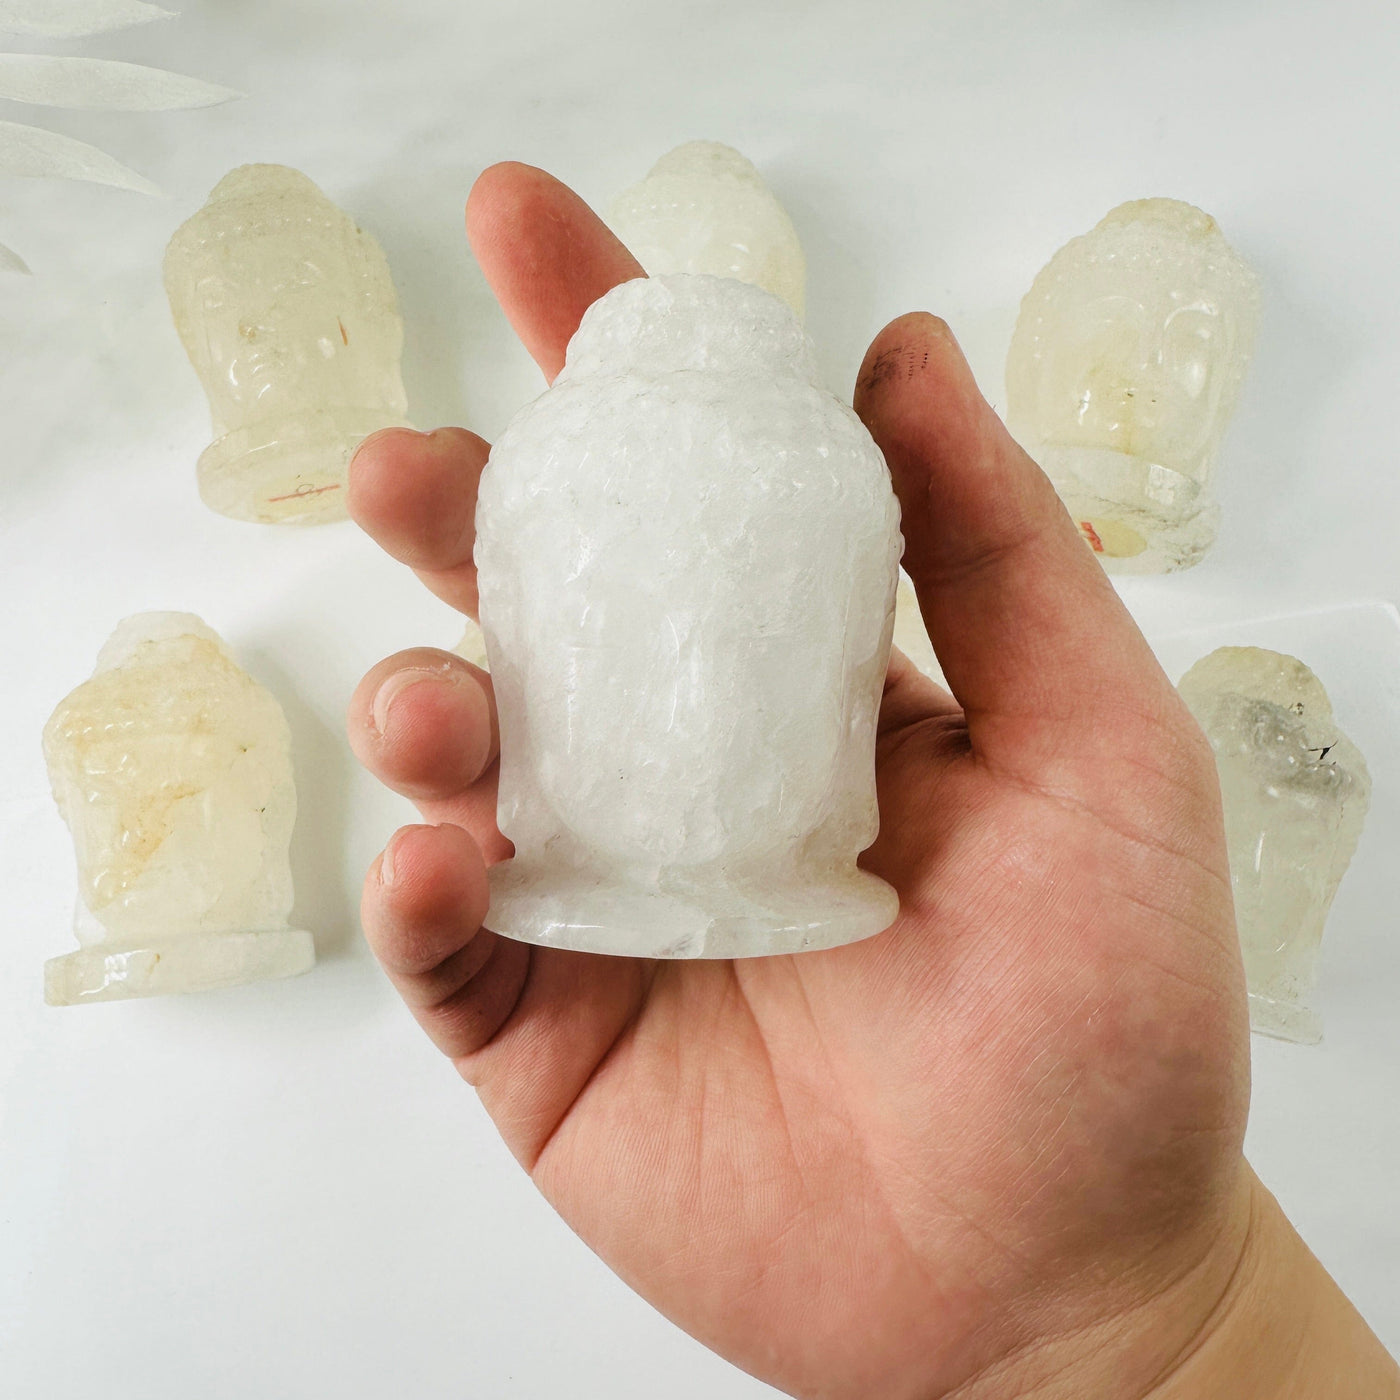 Crystal Quartz Carved Buddha Head - YOU CHOOSE Variant A in hand for size reference with other variants in background